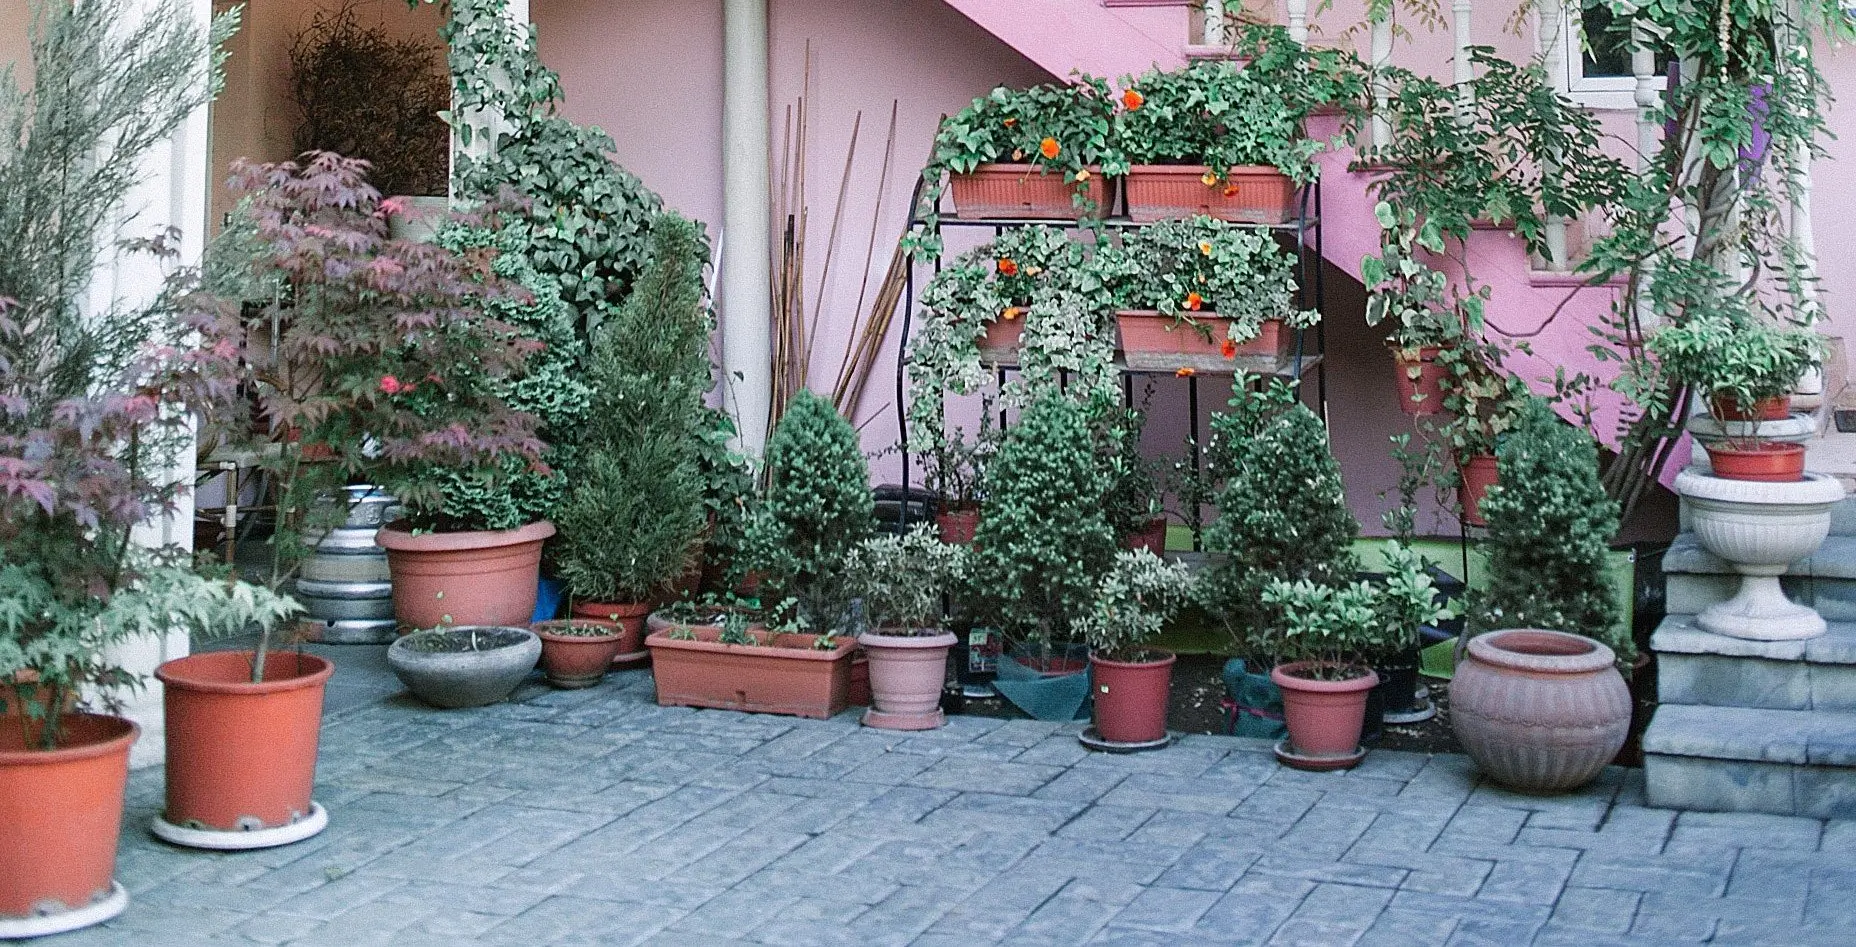 A patio with many potted plants and trees